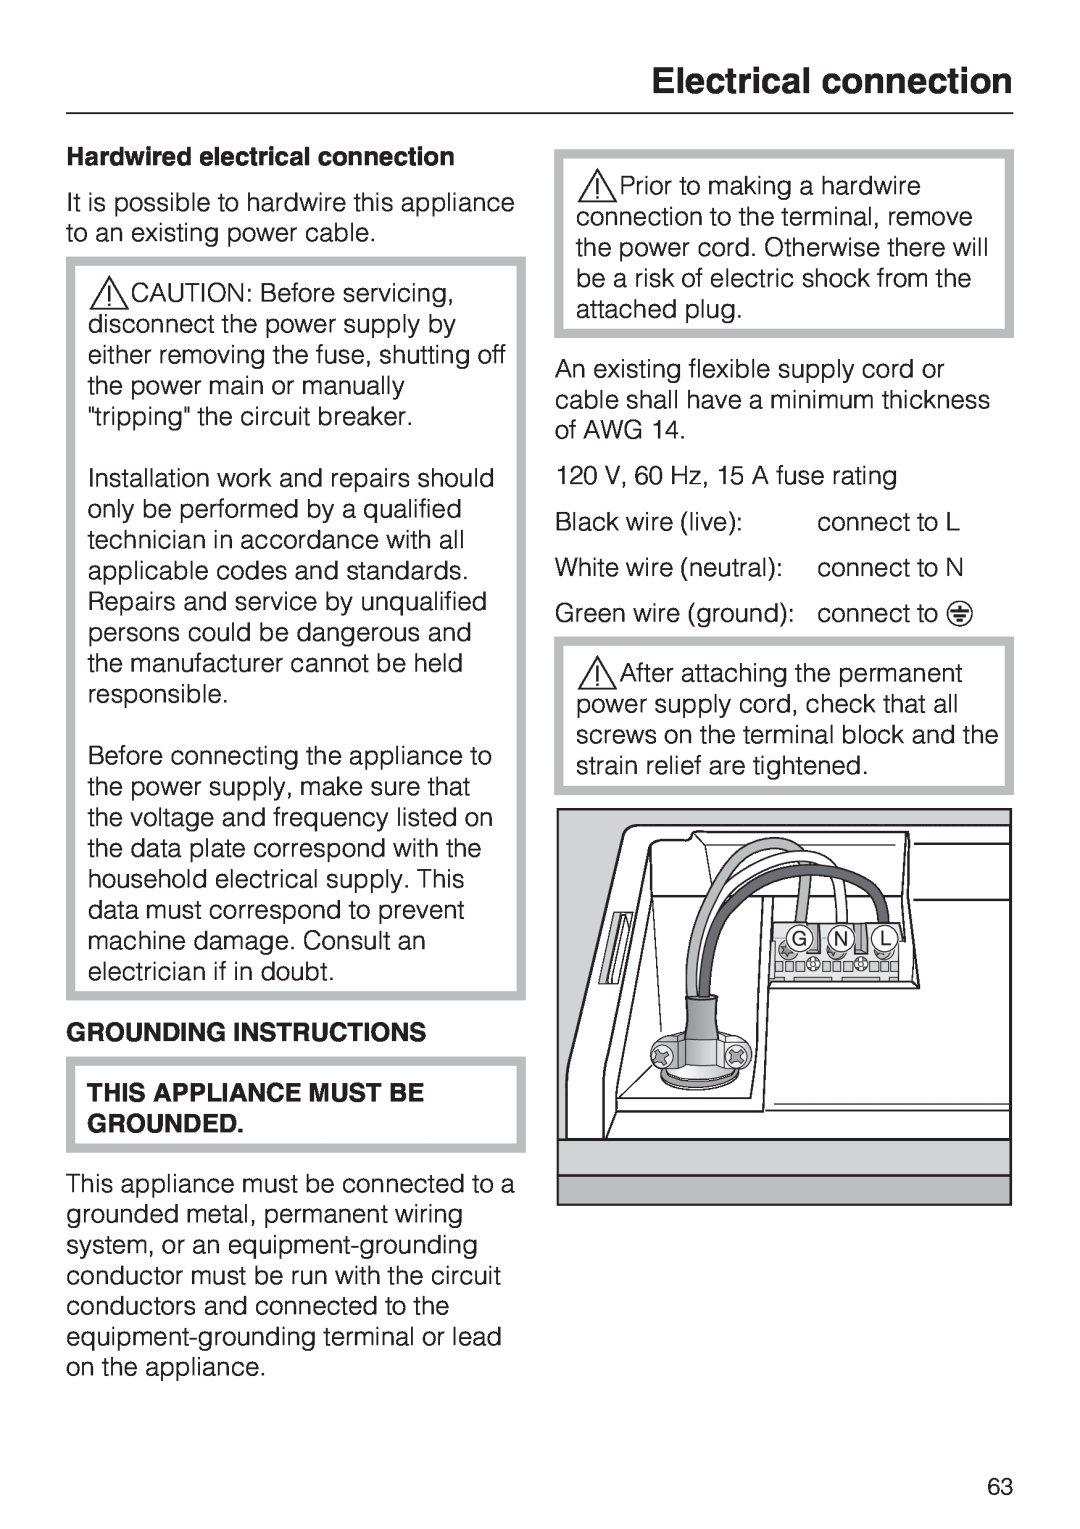 Miele G5600, G5605 manual Electrical connection, Hardwired electrical connection, Grounding Instructions 